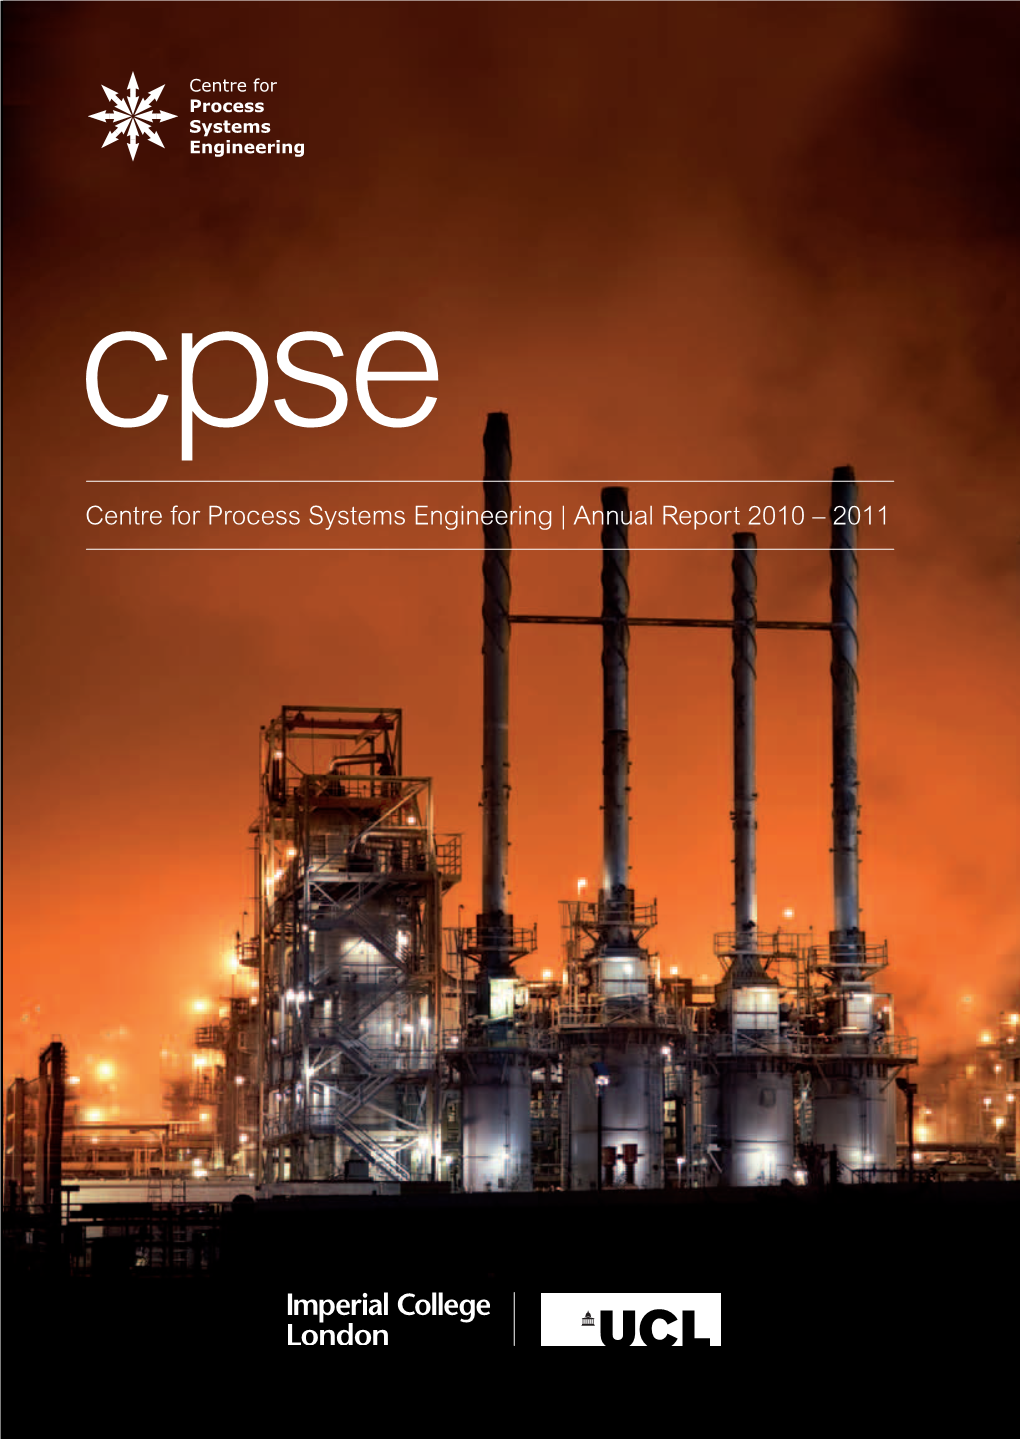 Centre for Process Systems Engineering | Annual Report 2010 – 2011